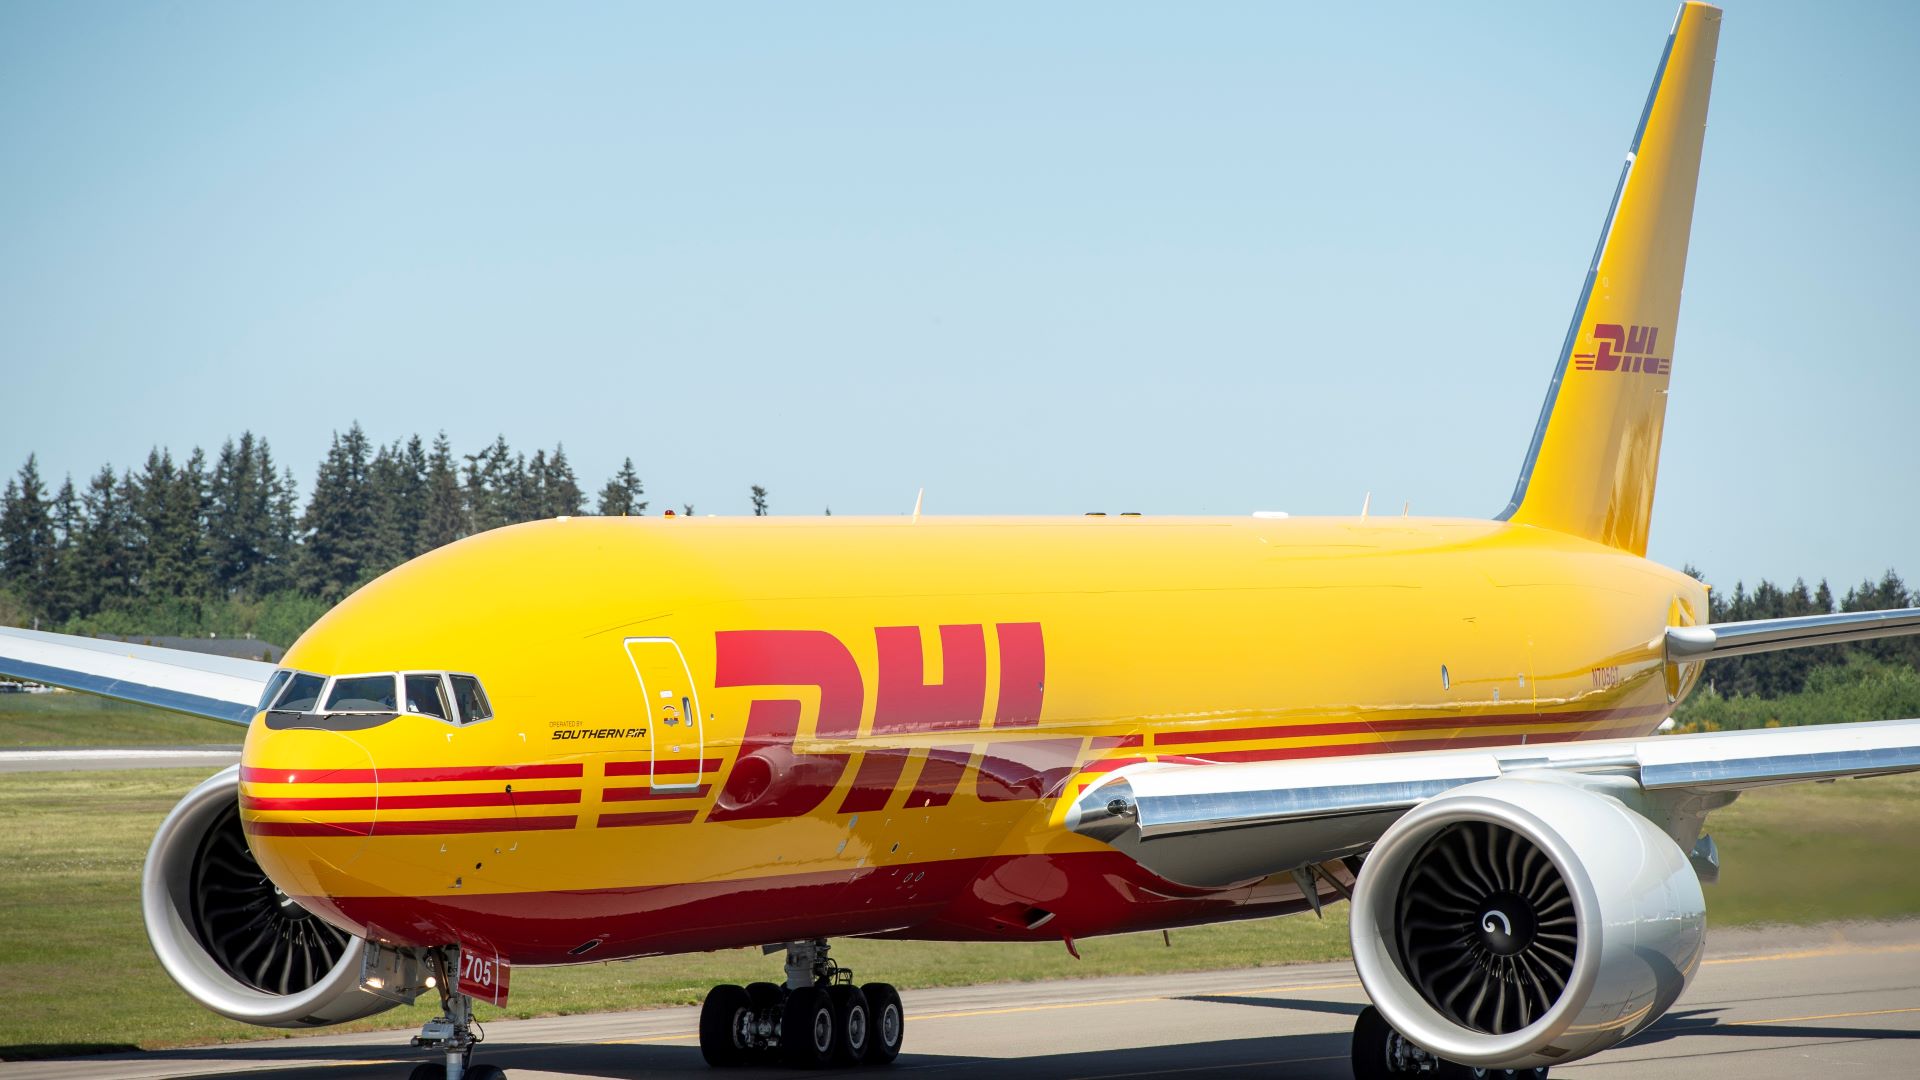 A mustard-colored DHL jet on the ground.